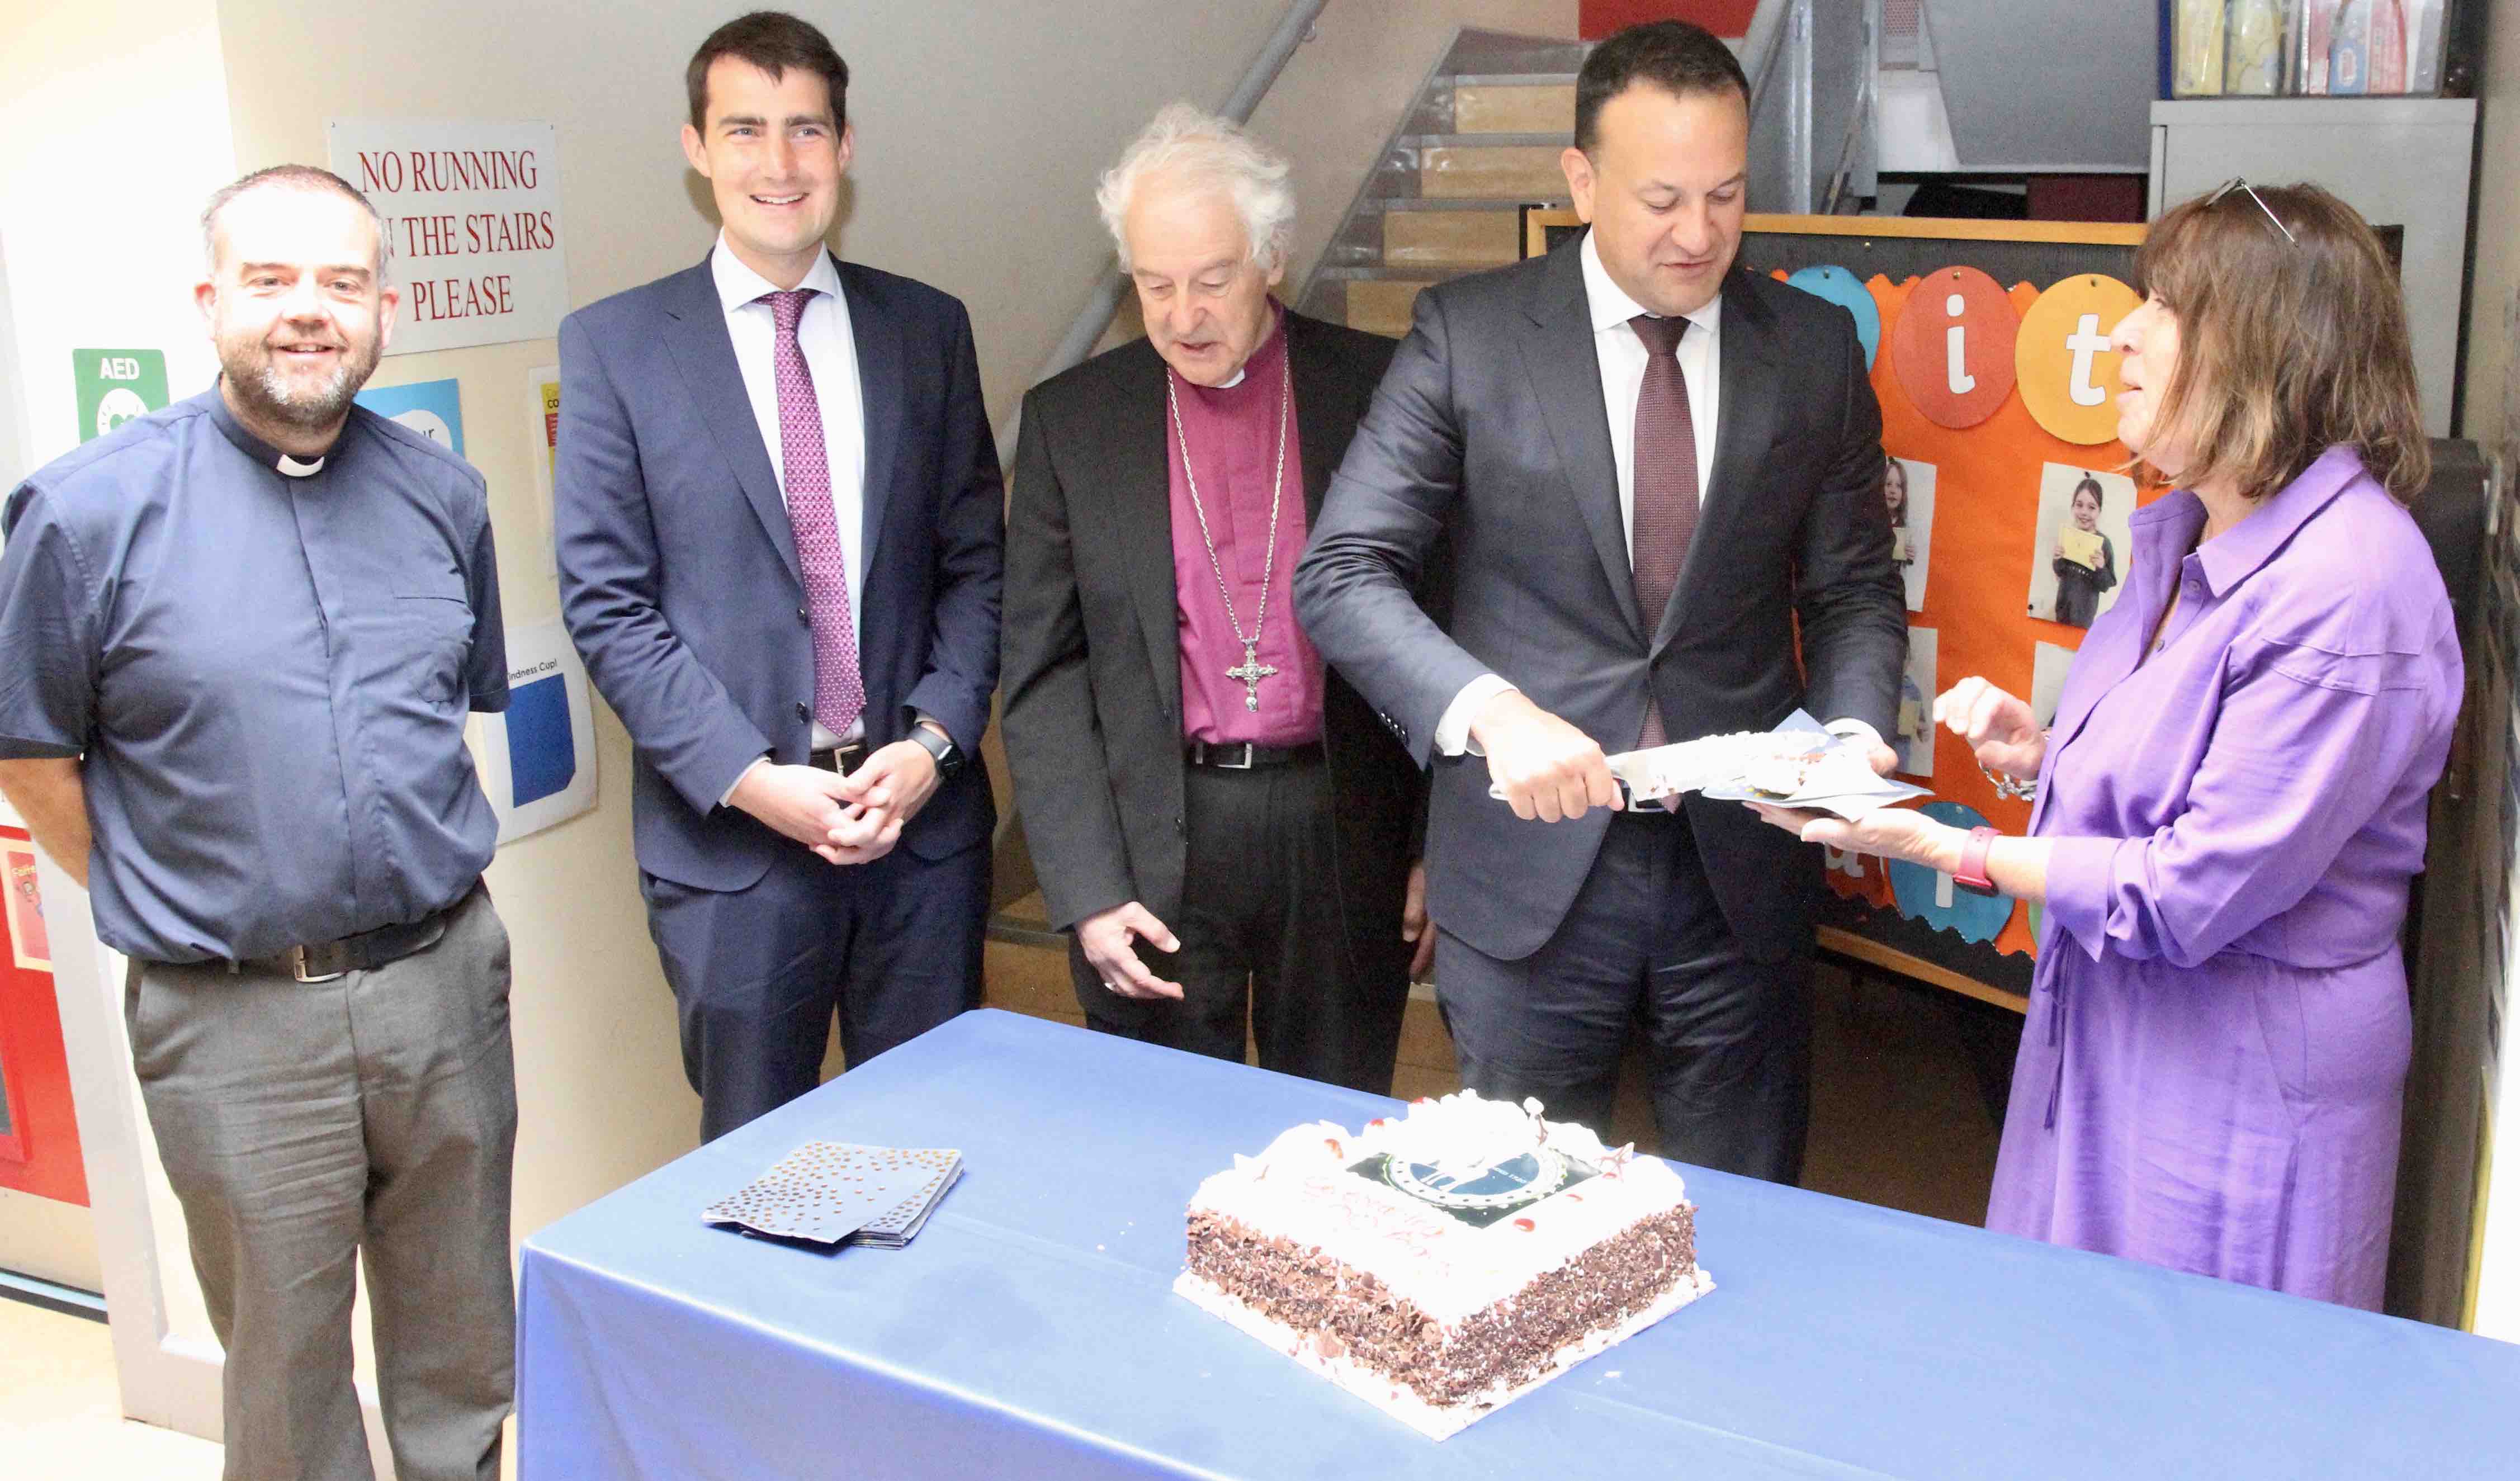 The Taoiseach cuts the cake for the Revd Colin McConaghie, Minister Jack Chambers, Archbishop Michael Jackson and principal Sandra Moloney.